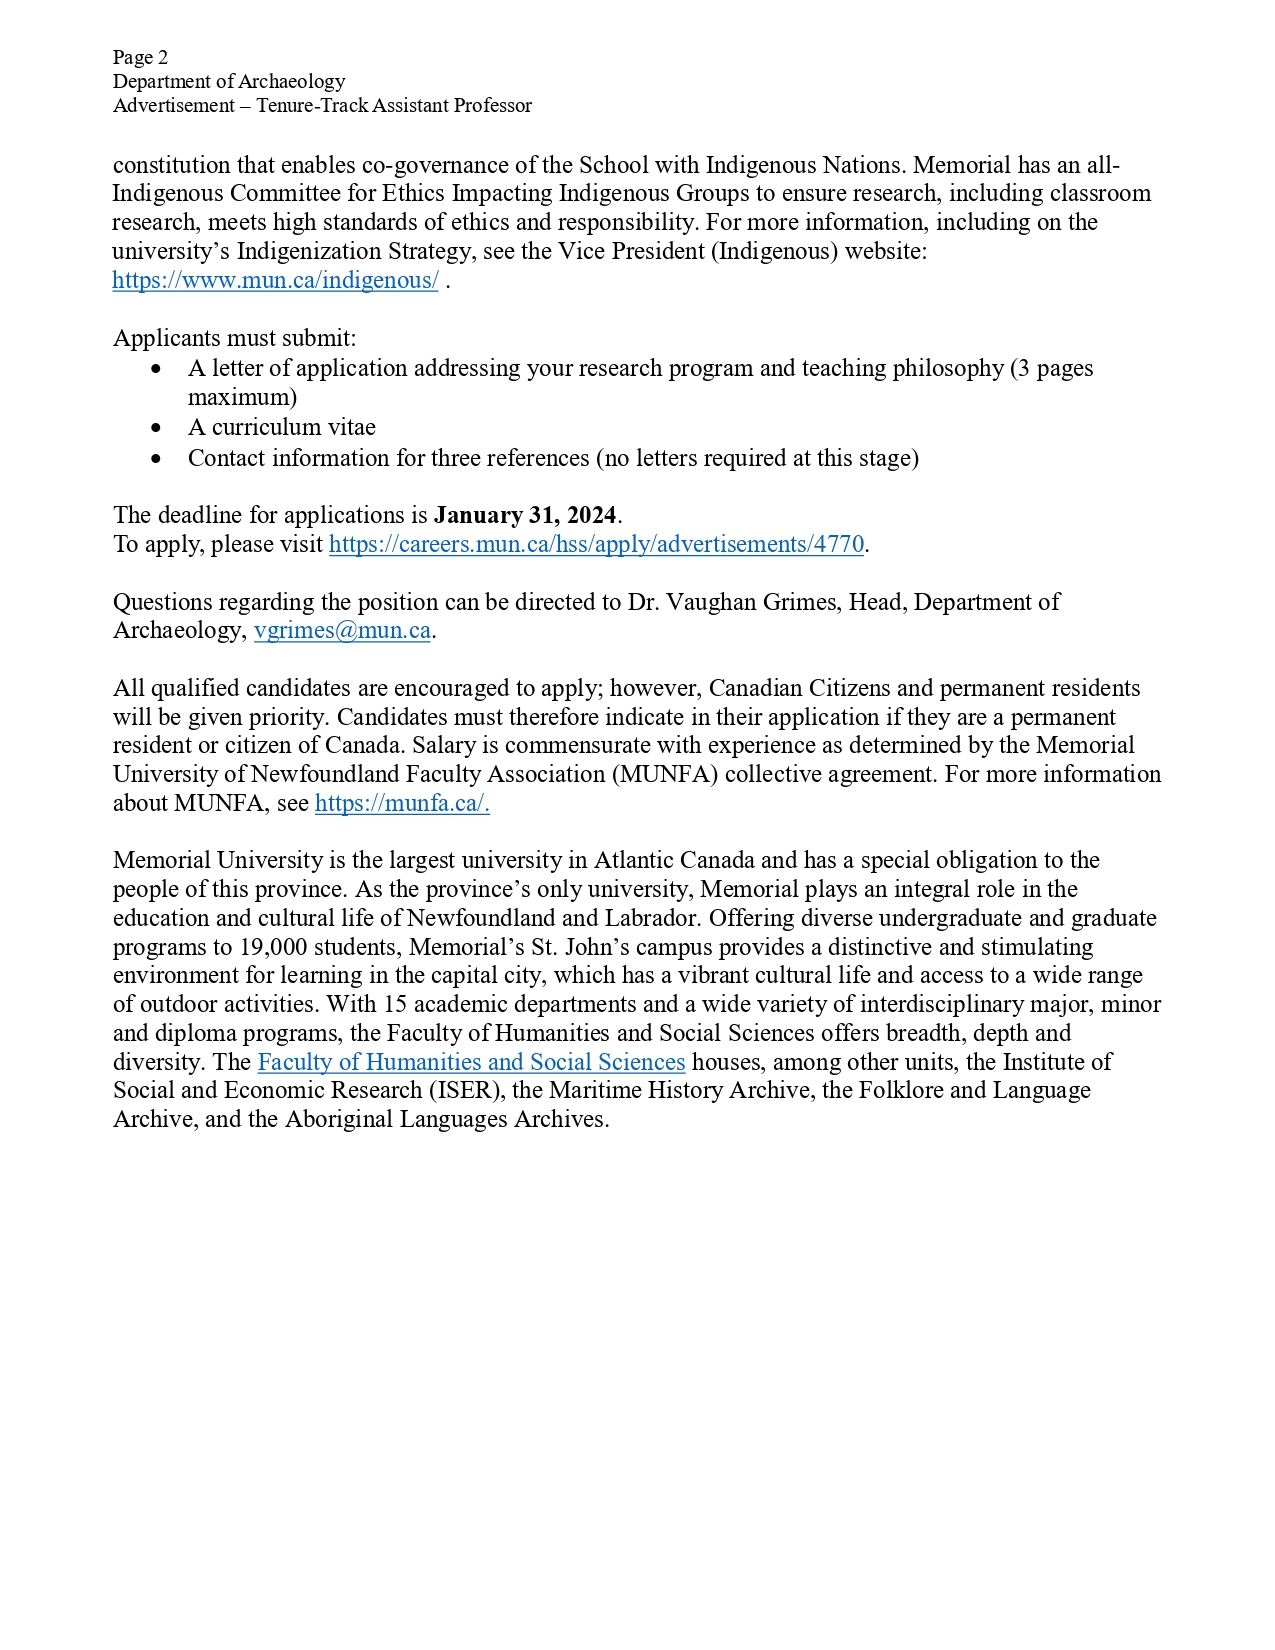 Job ad for Assistant Professor in the Department of Archaeology due January 31, 2024 (Page 2 of 2)